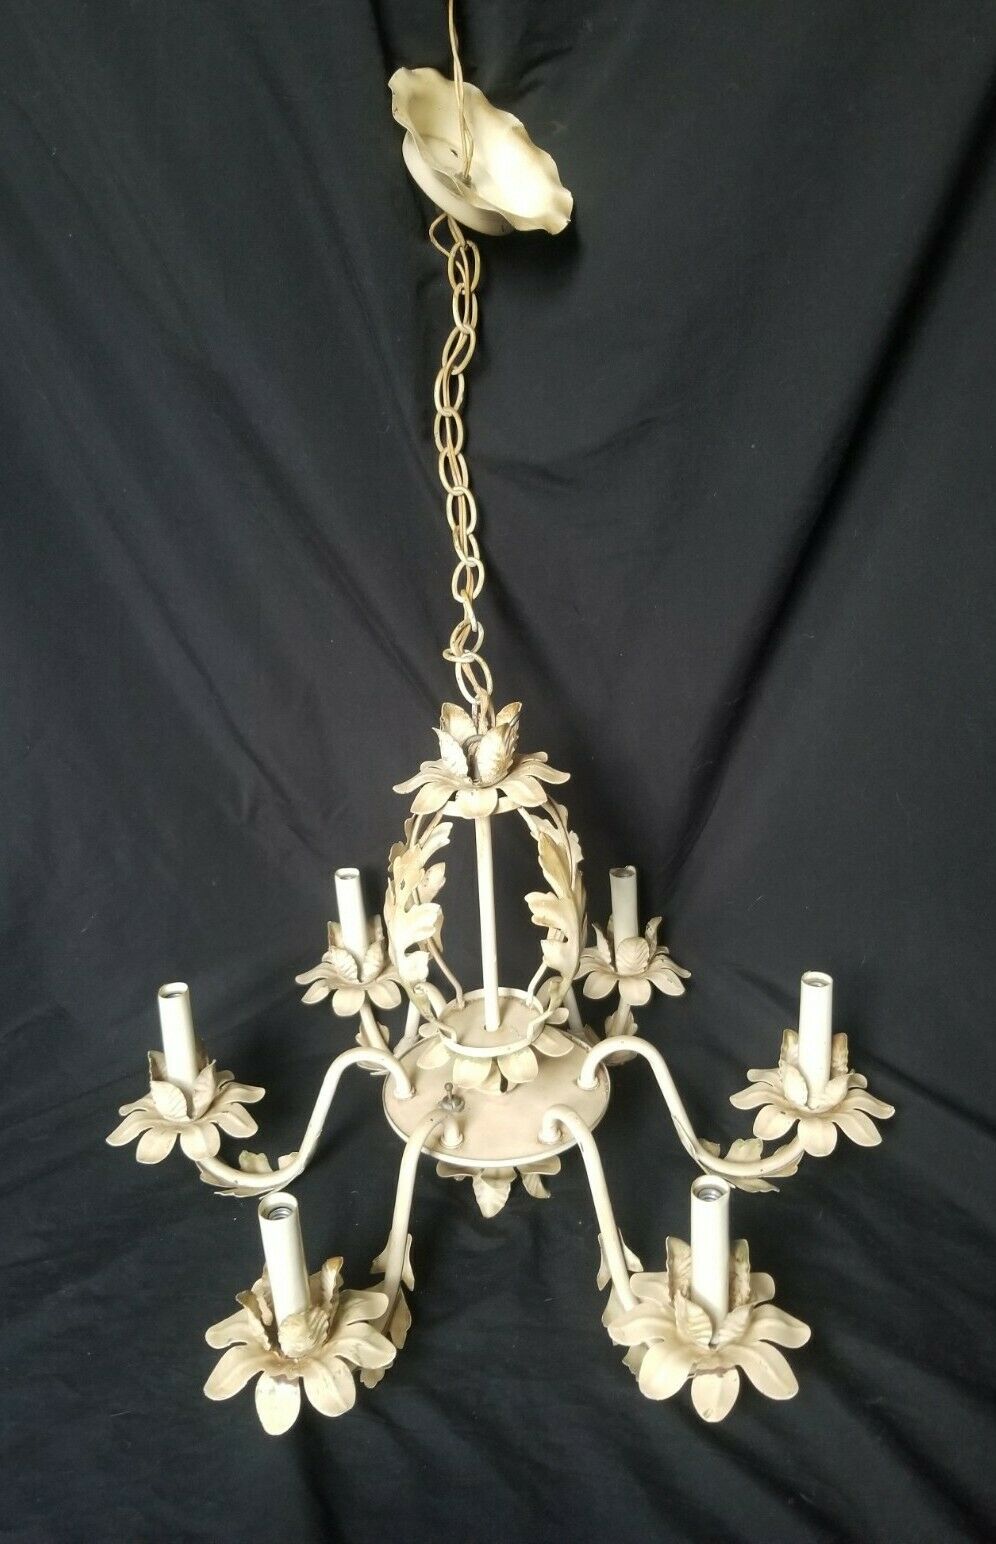 Vintage Metal Tole Flower Chandelier White 6 Arm Shabby Chic Country Decor Tlc